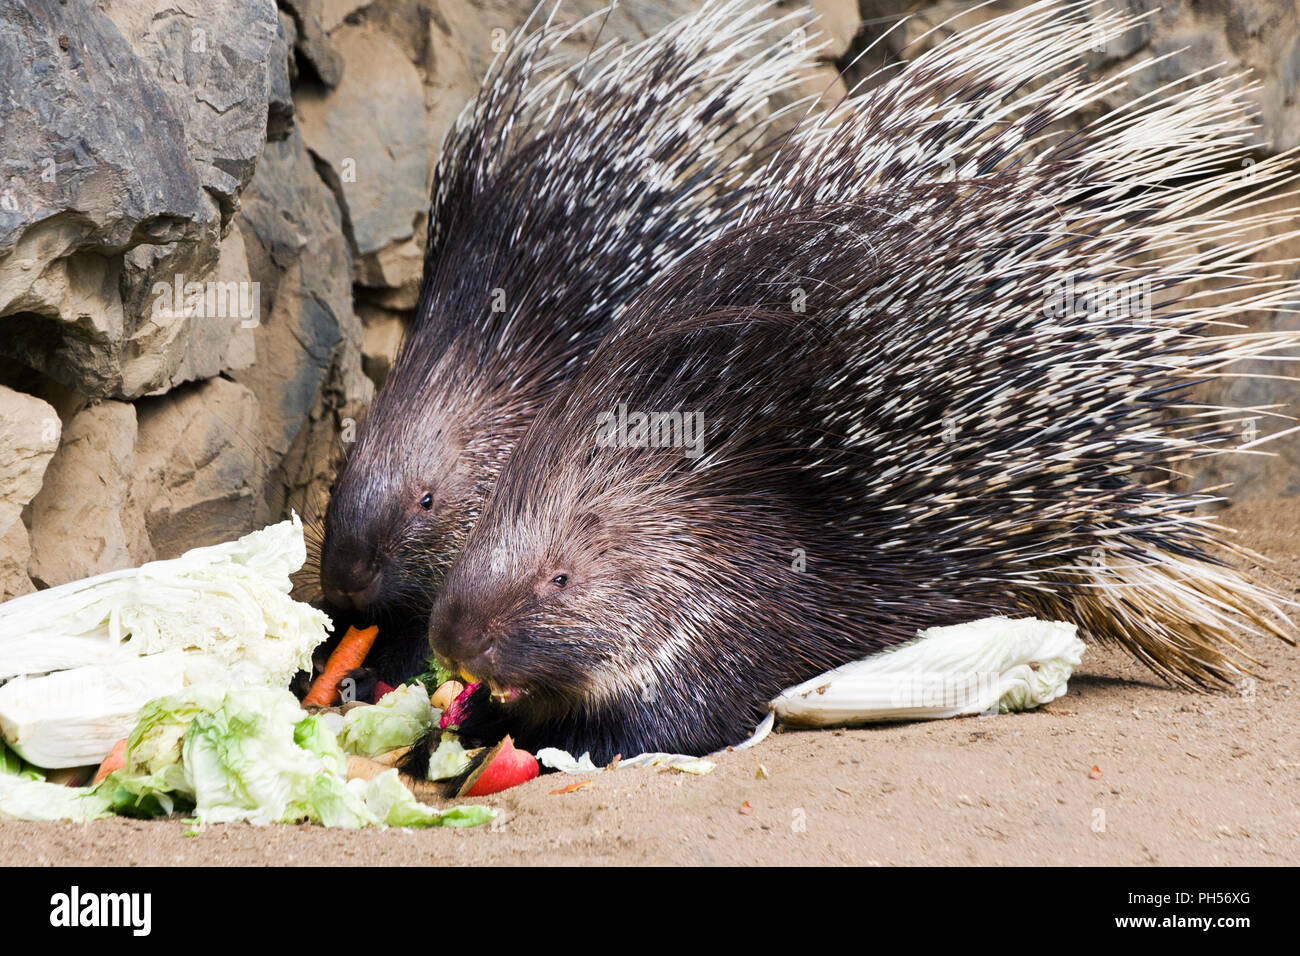 Hystrix indica / The Indian crested porcupine or Indian porcupine - ZOO Troja, Prague, Czech republic Stock Photo